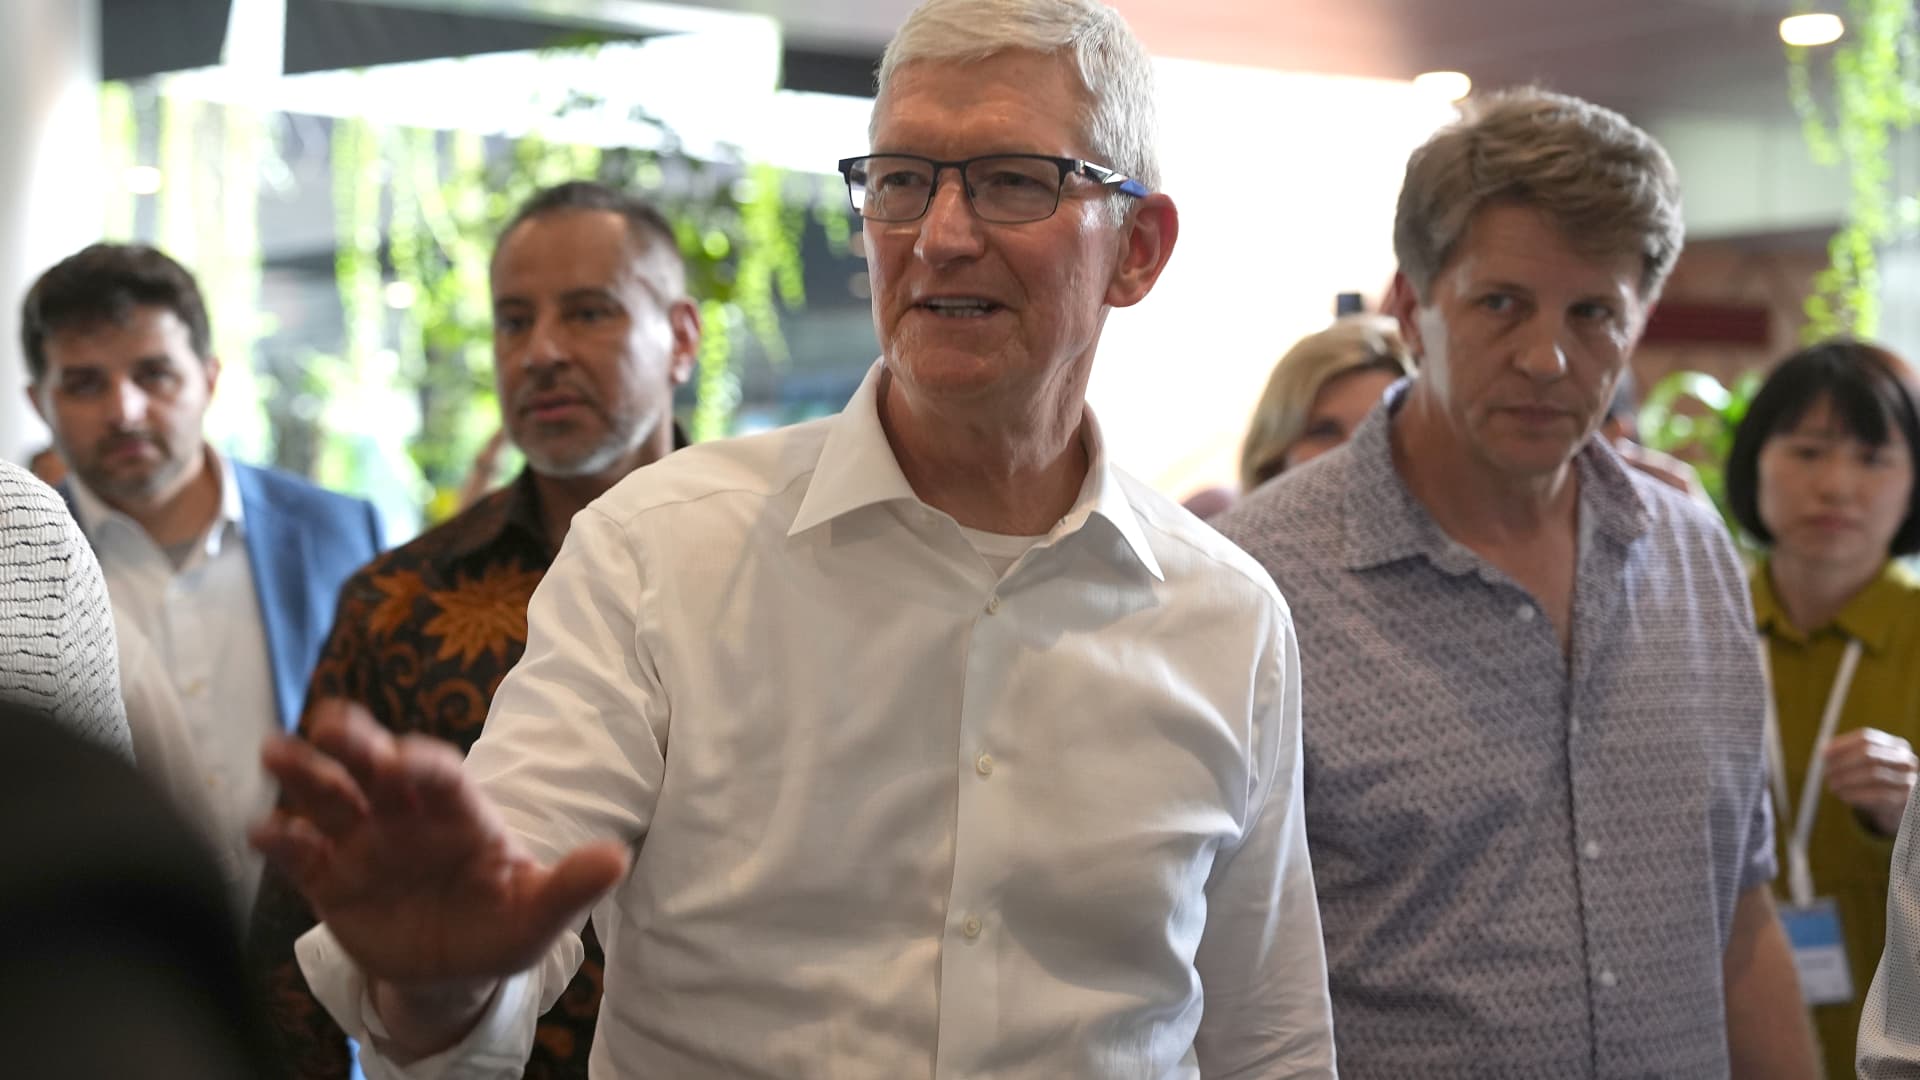 Tim Cook visits Singapore amid Apple’s Southeast Asia expansion efforts